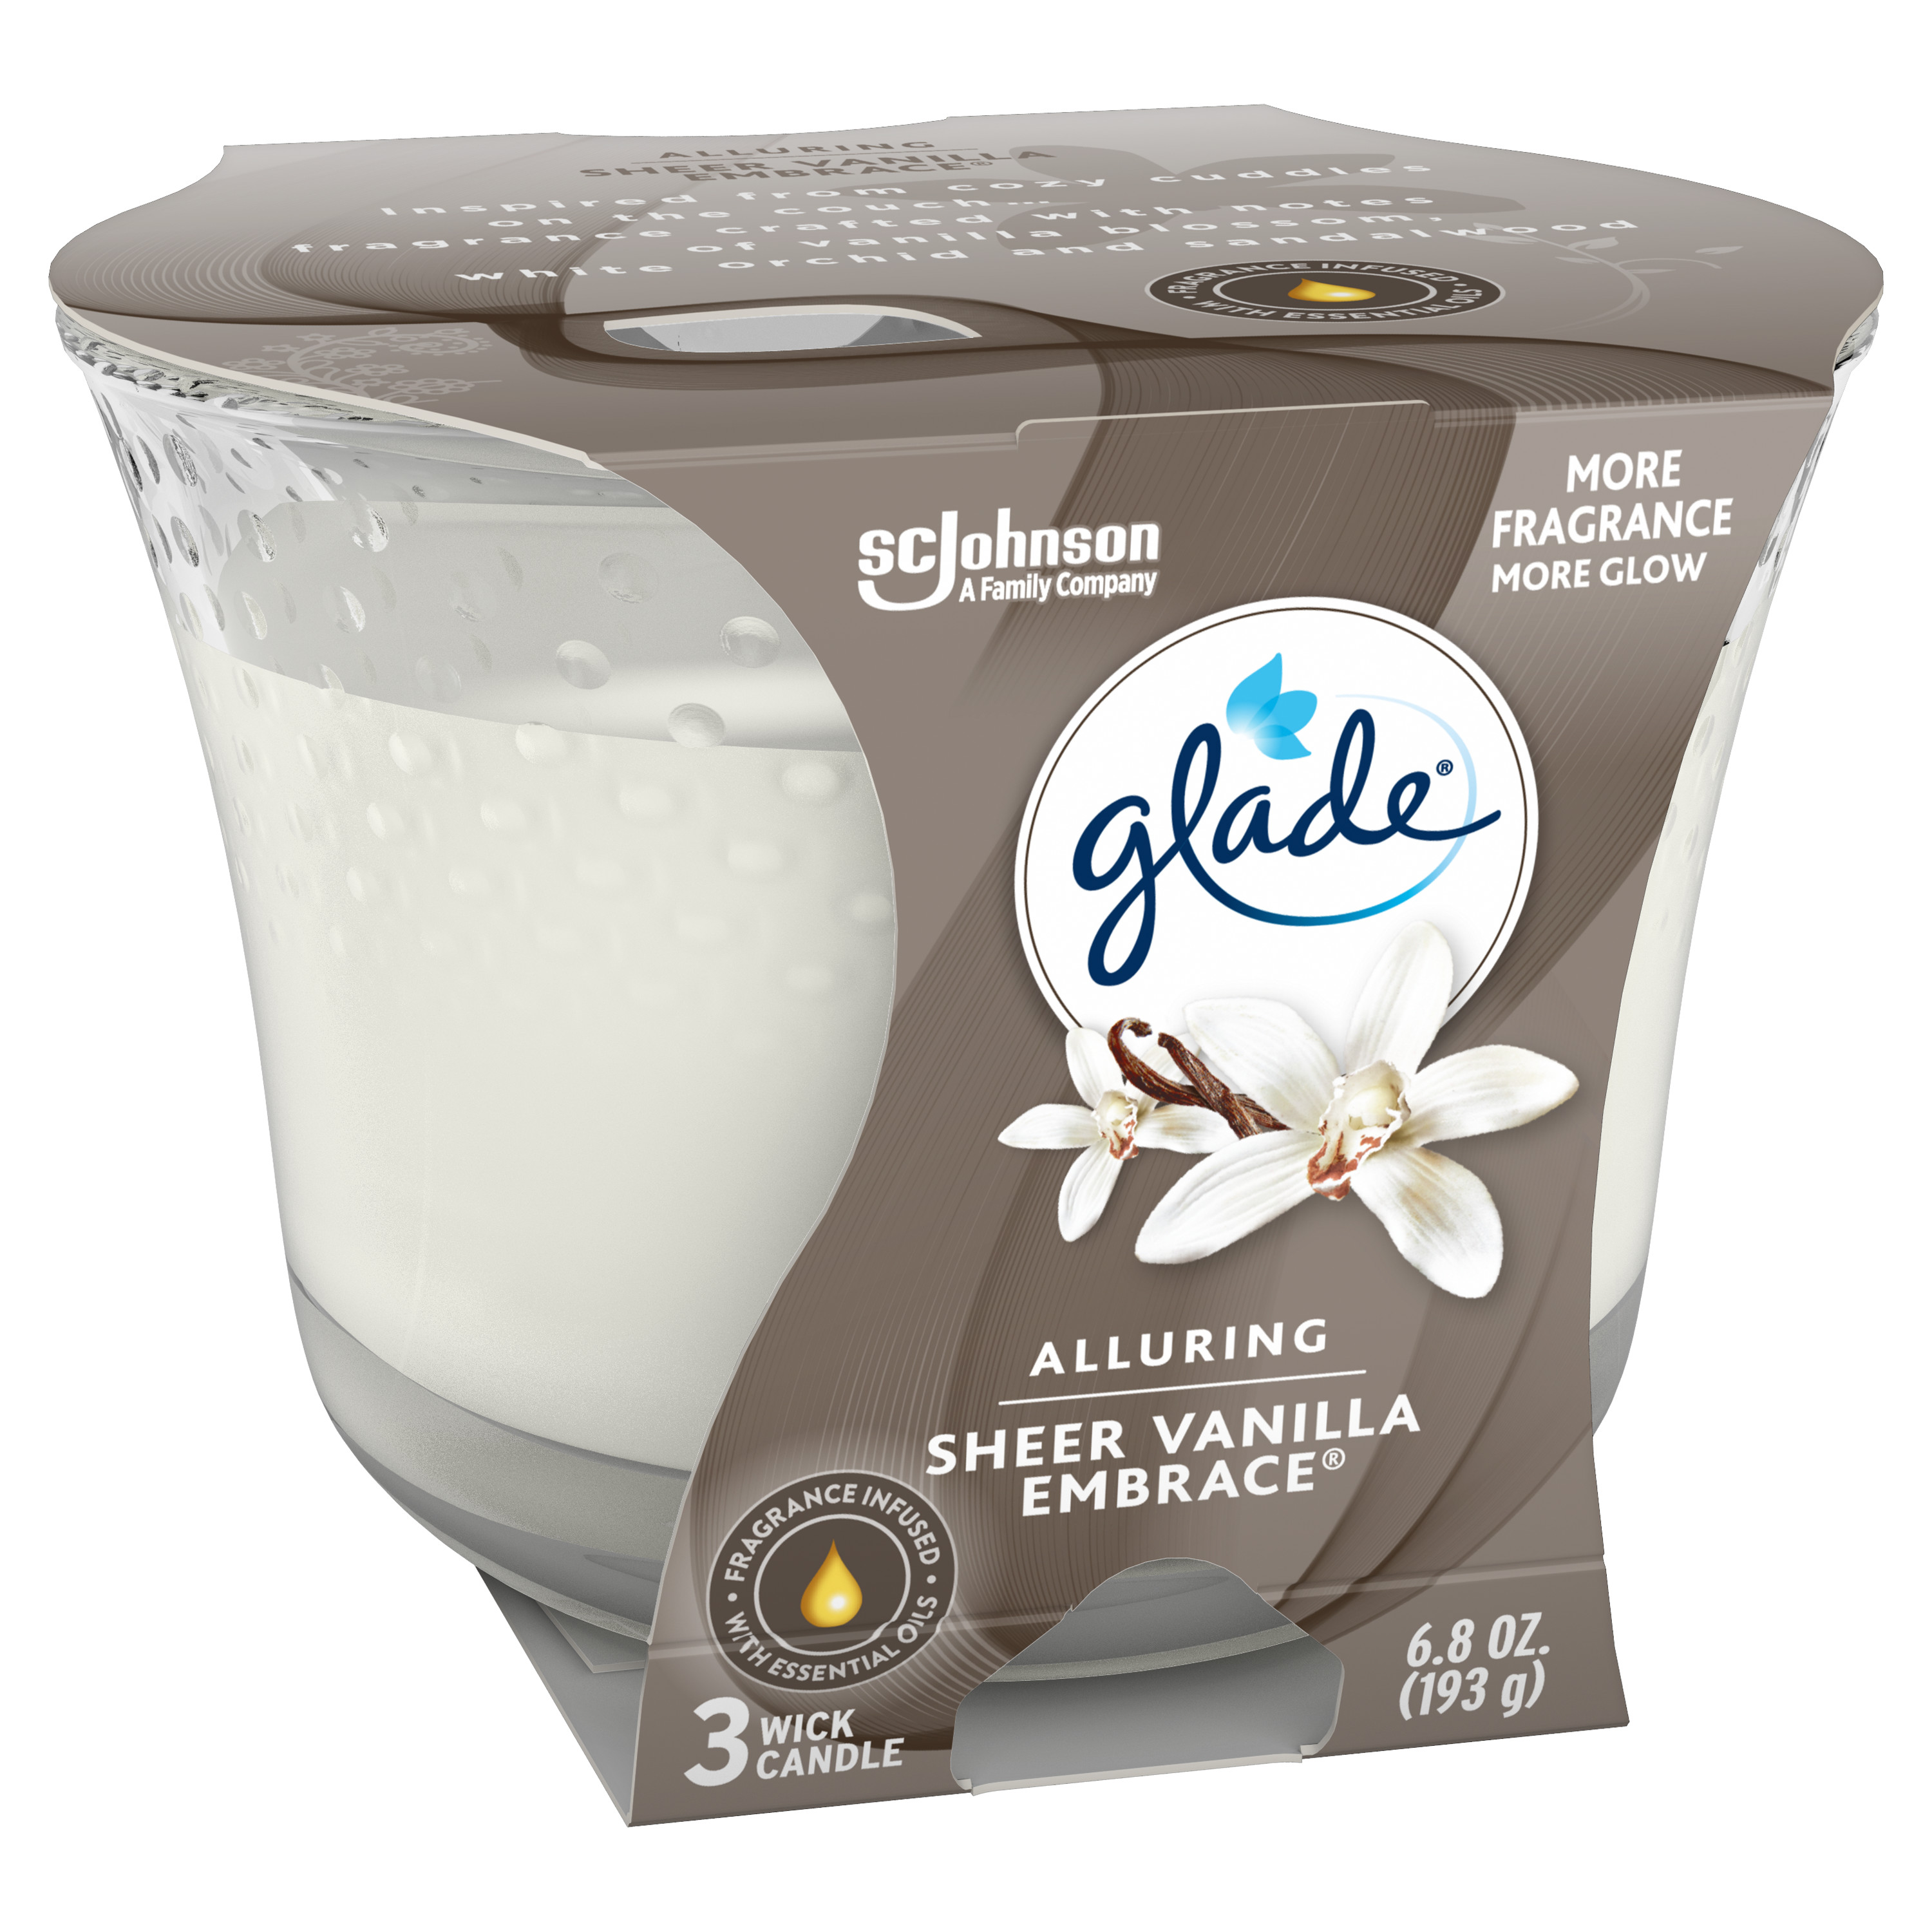 Glade Candle Alluring Sheer Vanilla Embrace Scent, 3-Wick, 6.8 oz (193 g), 1 Count, Fragrance Infused with Essential Oils, Notes of Vanilla Blossom, White Orchid, Sandalwood Scented Candles - image 3 of 12